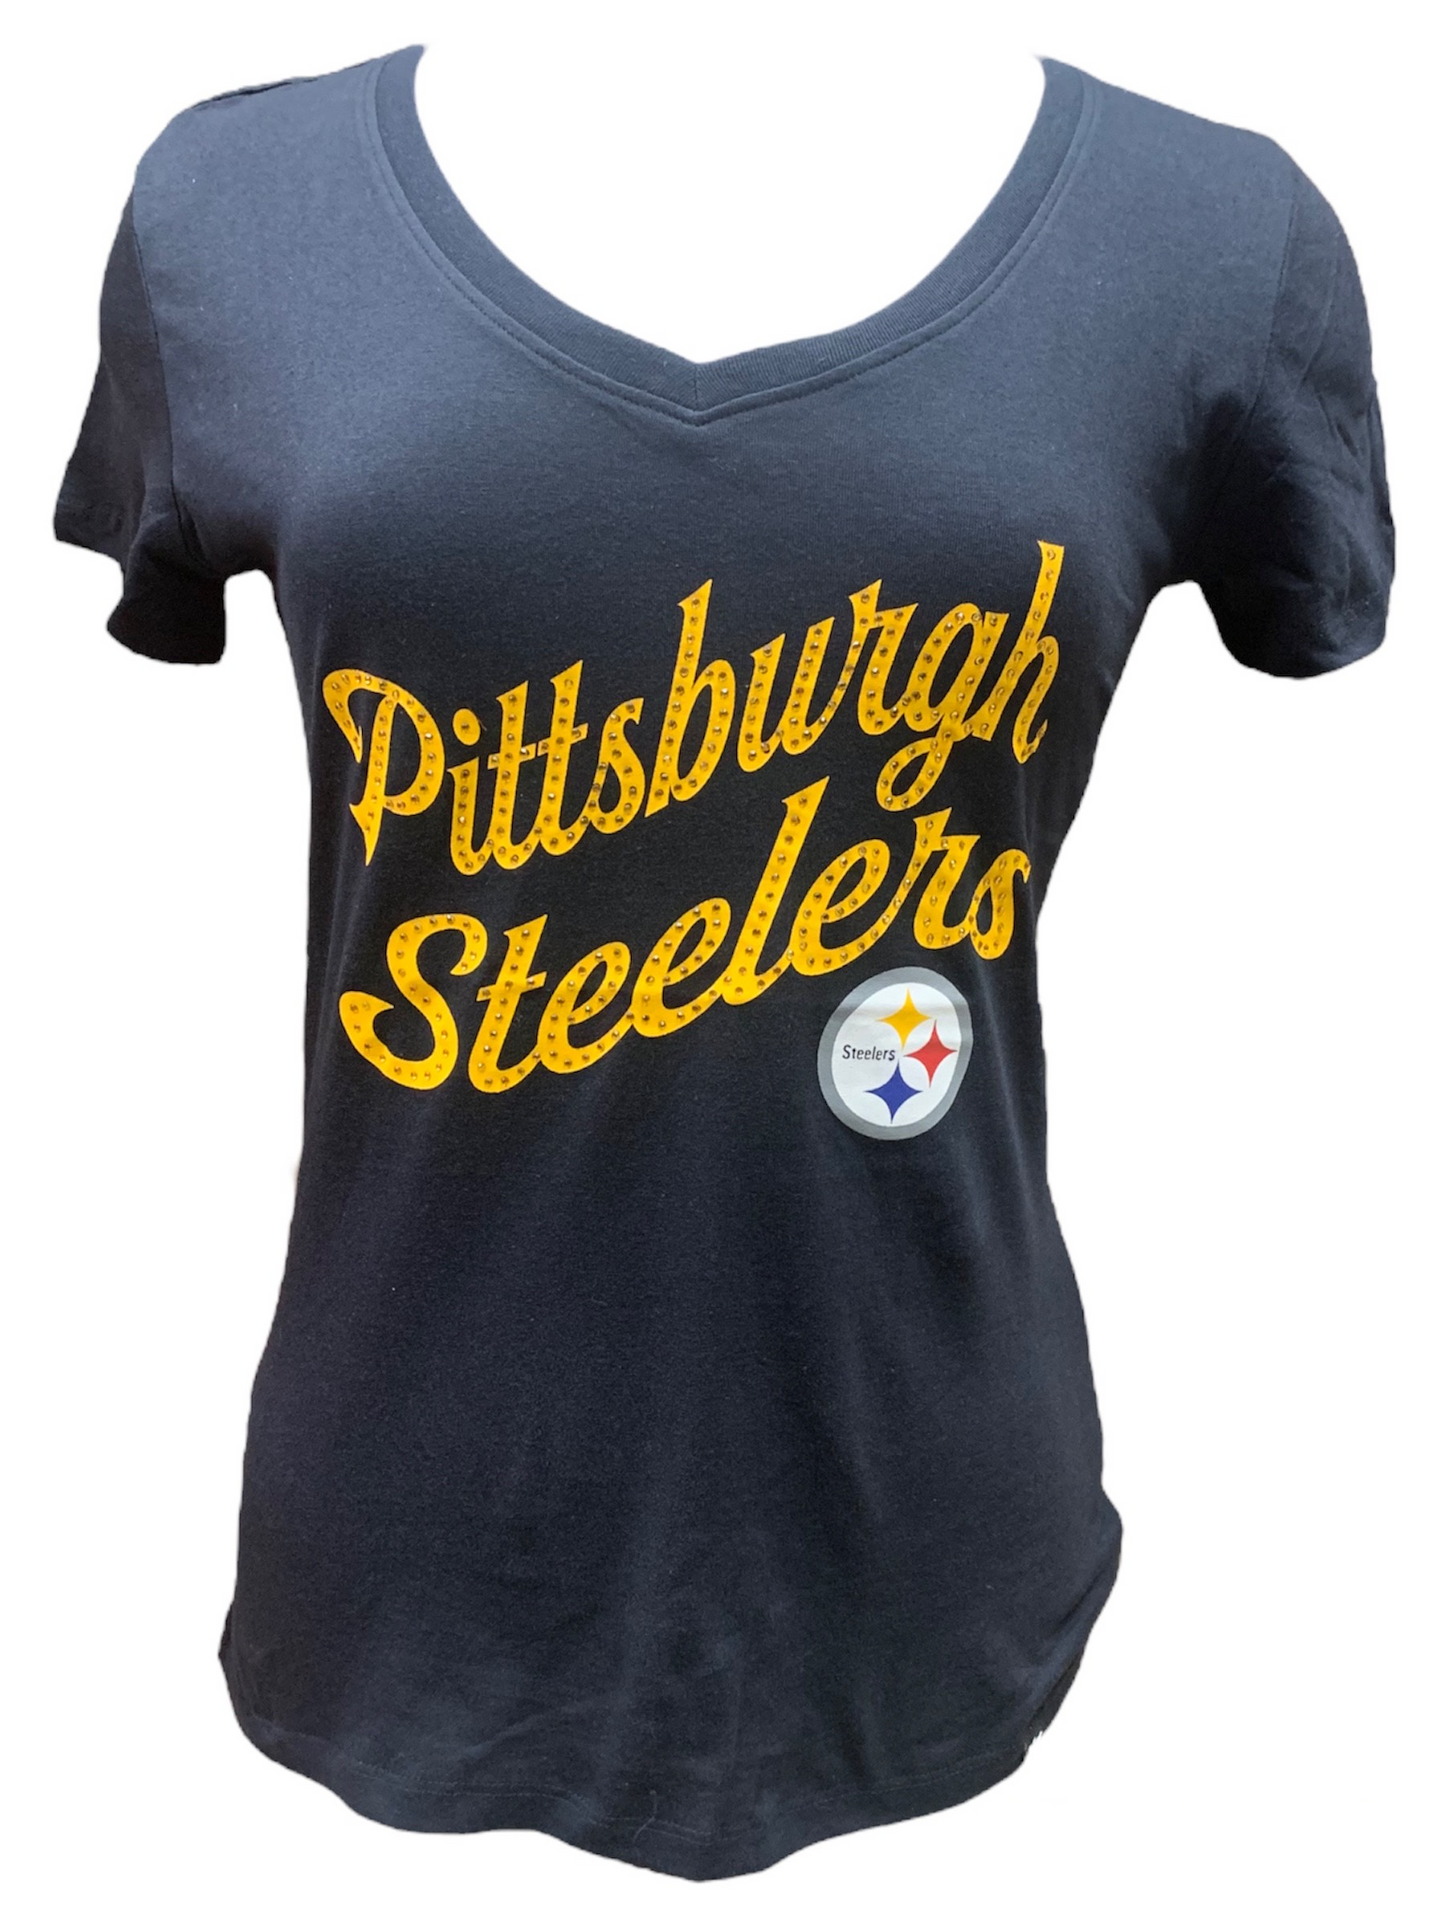 PITTSBURGH STEELERS WOMEN'S BEDAZZLE T-SHIRT